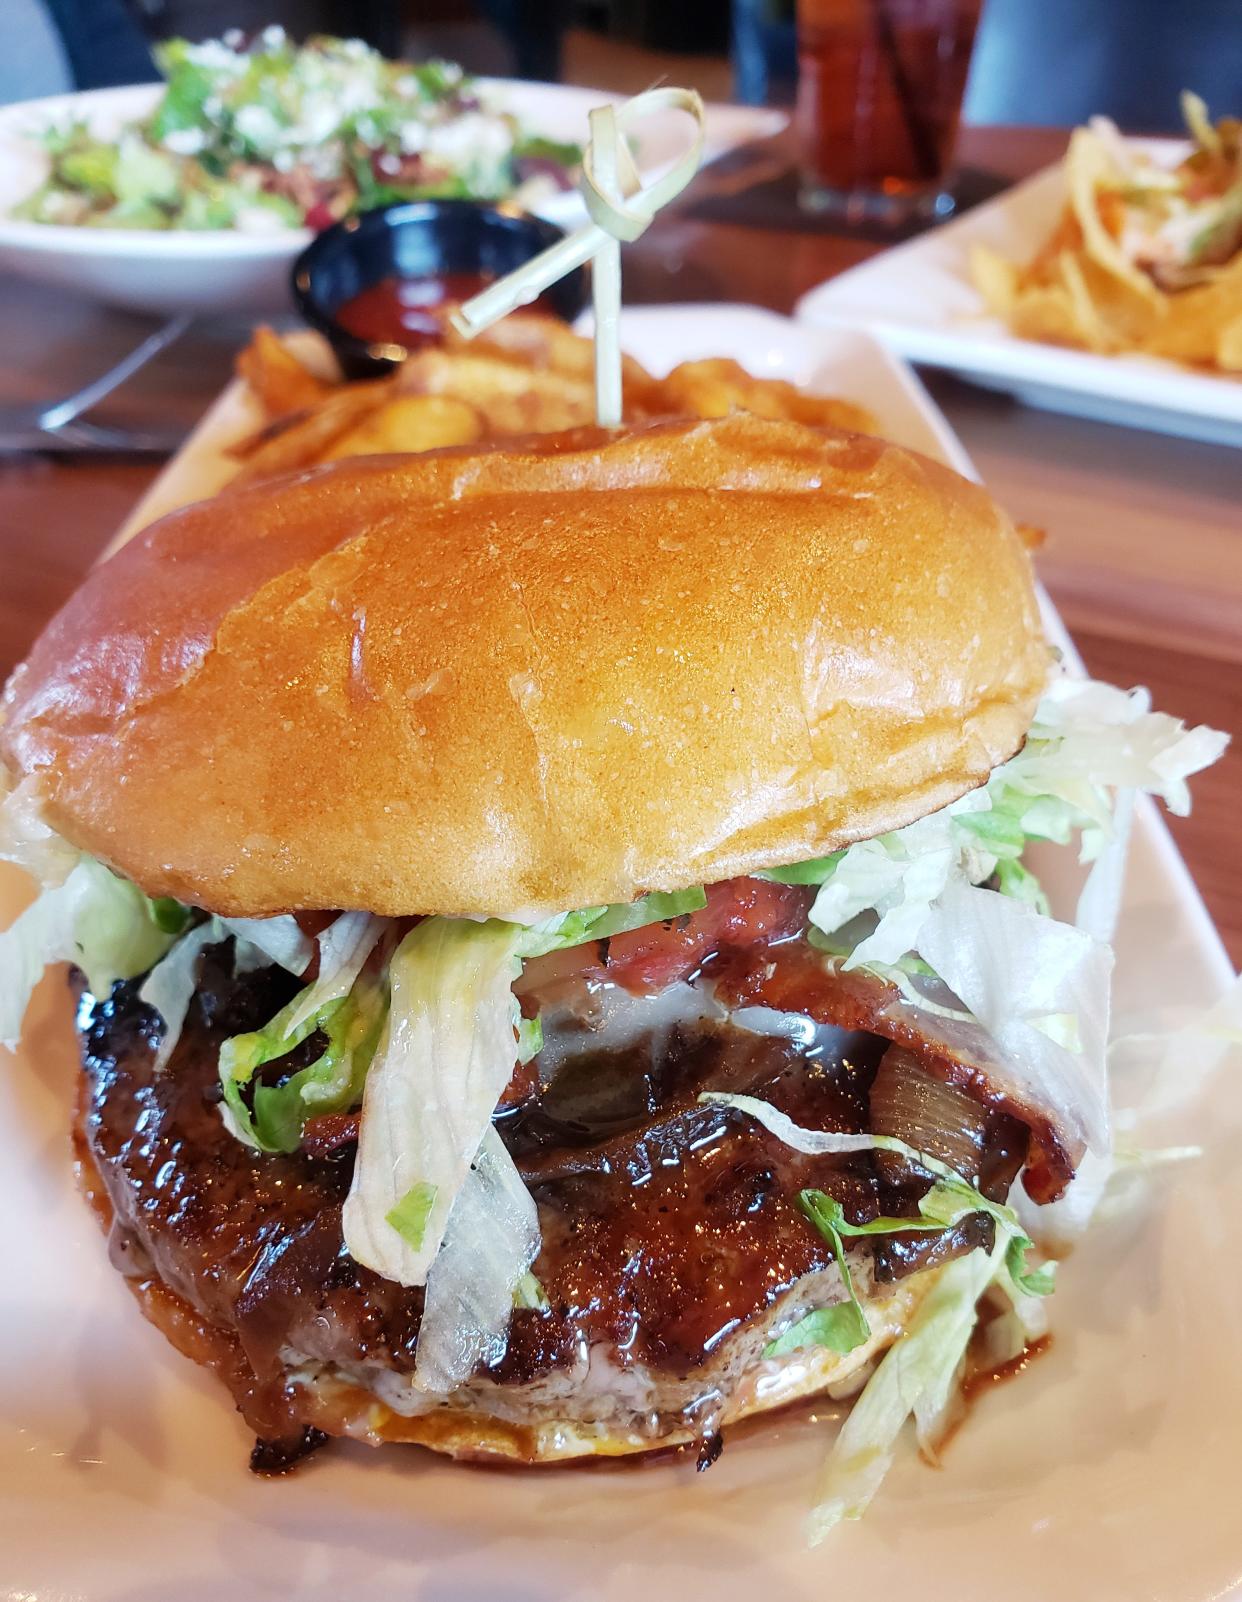 Bru Burger Bar opened Monday in Bloomington, where burgers, like this one topped with cheese, bacon, tomato jam, caramelized onions, chopped lettuce and mayo, are on the menu.